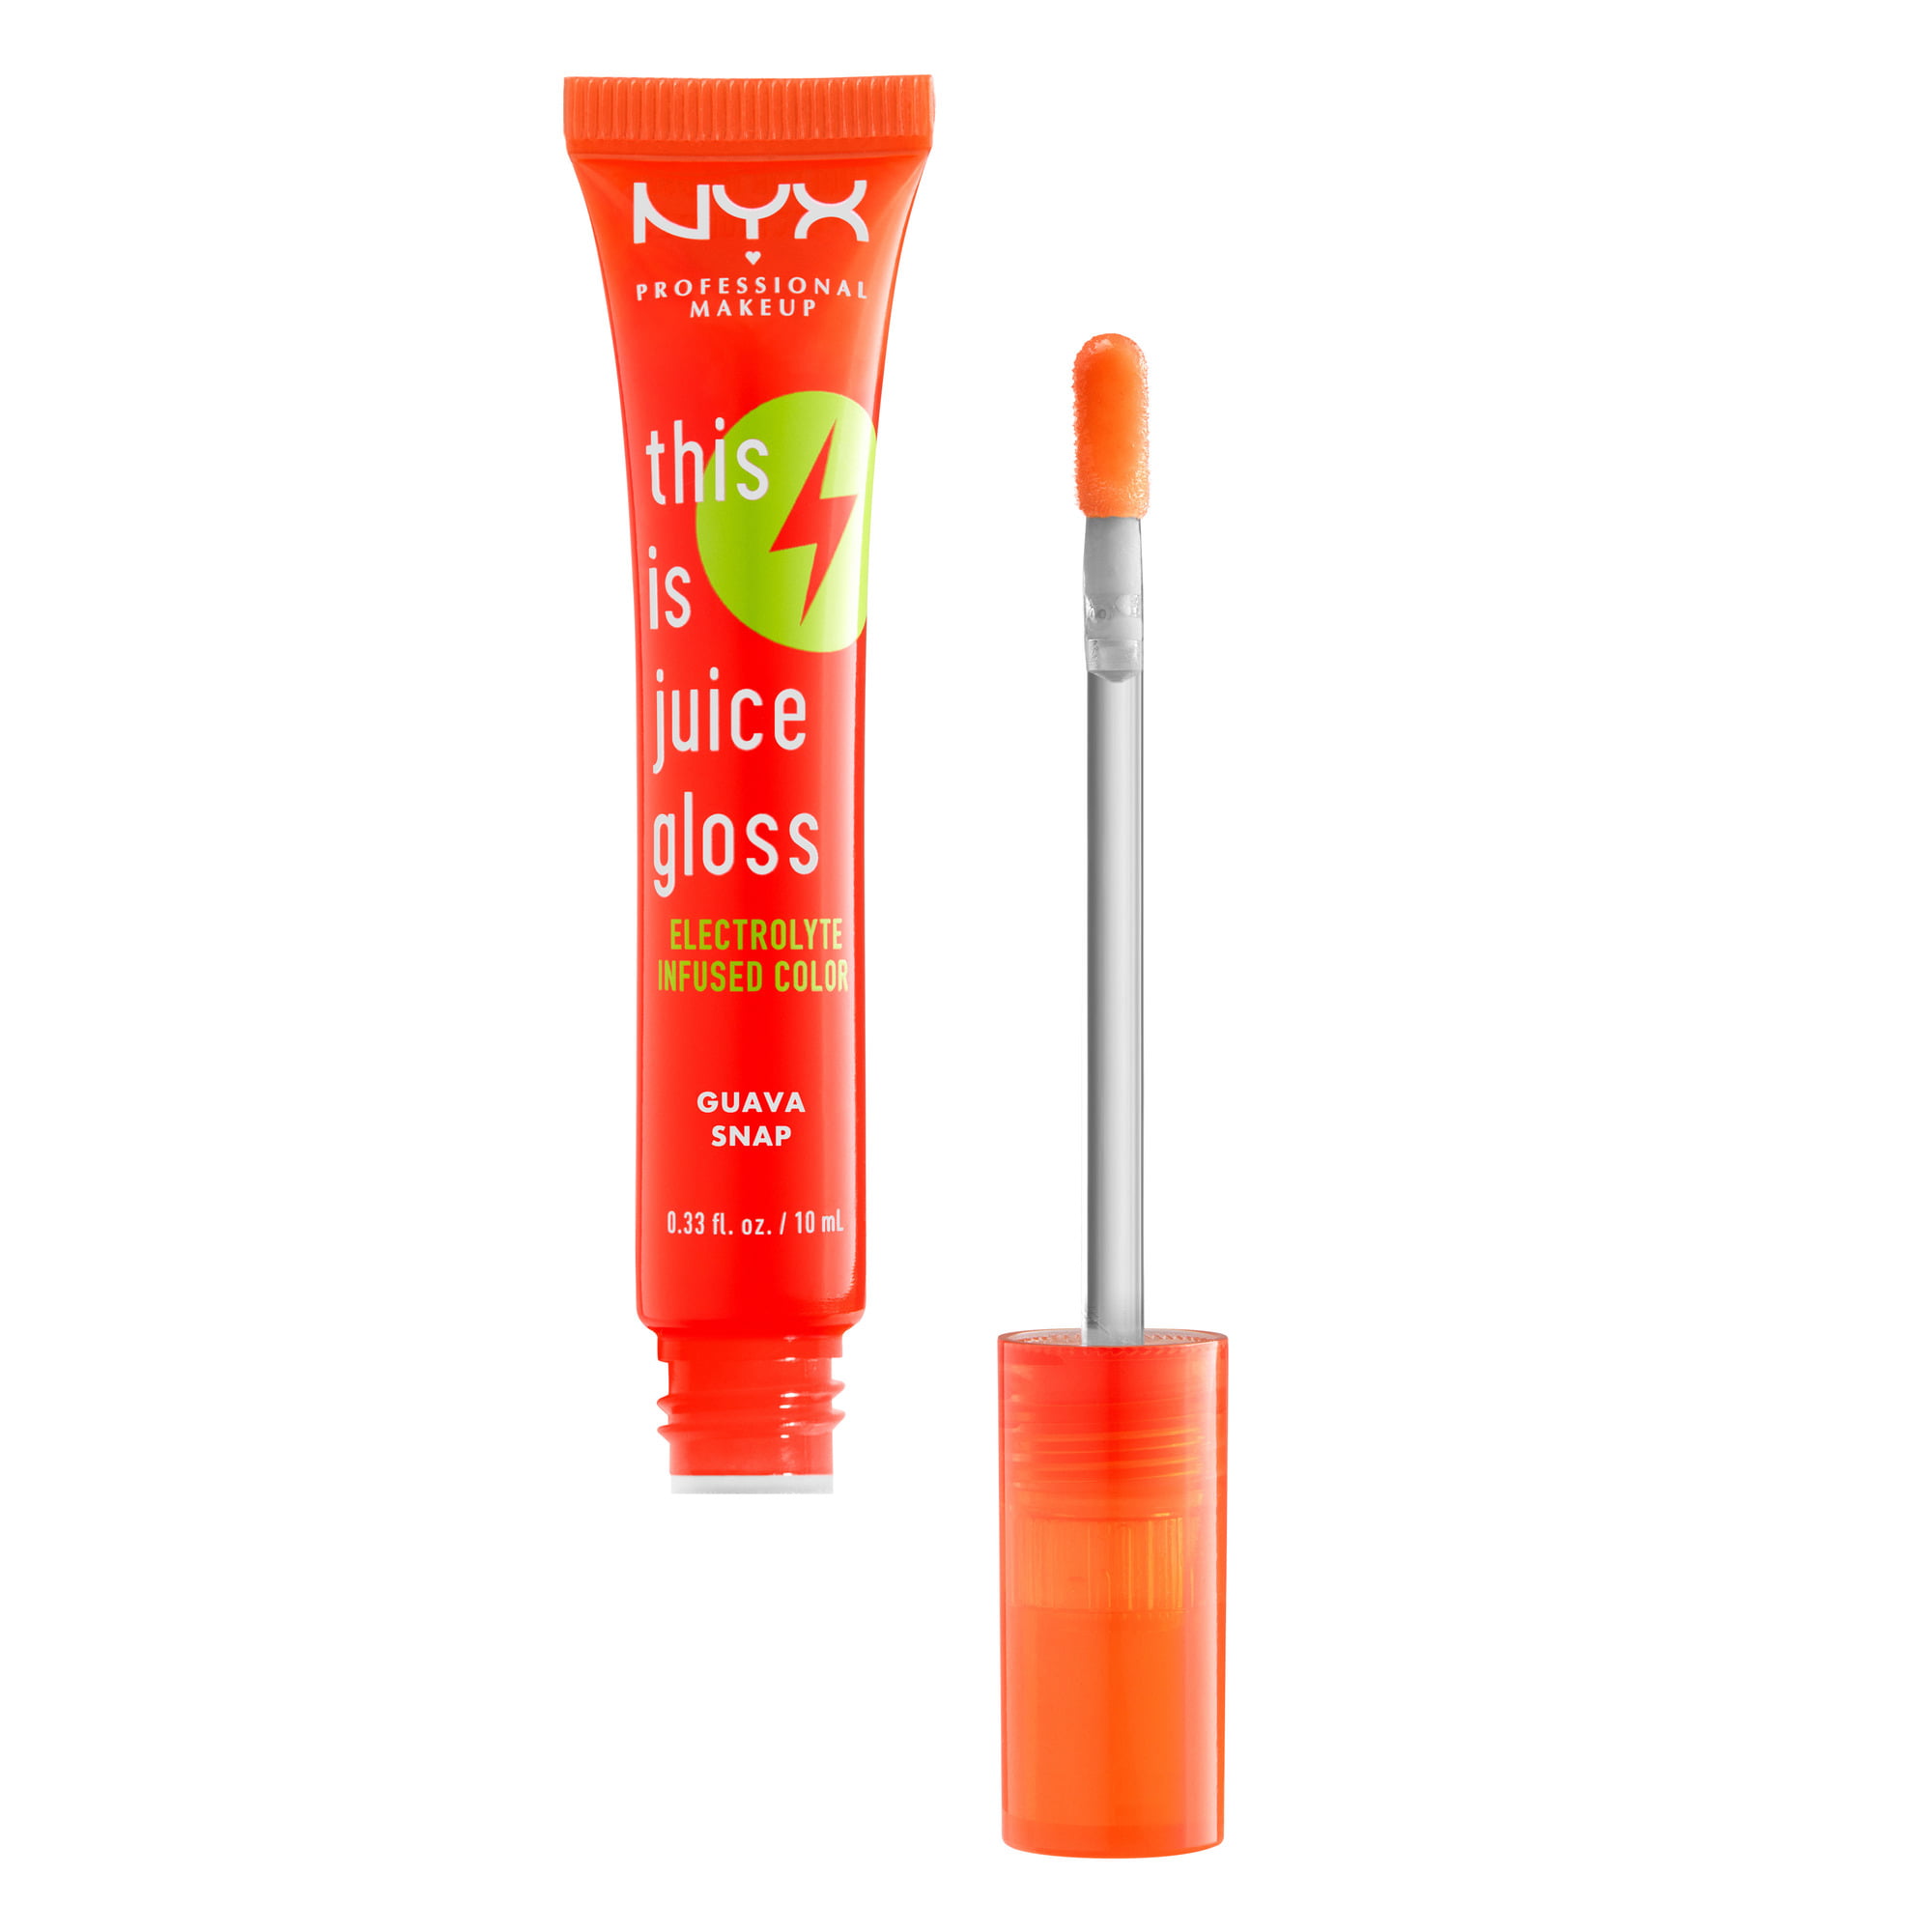 NYX Professional Makeup This Is Juice Gloss, Hydrating Lip Gloss, Guava Snap, 0.33 fl oz